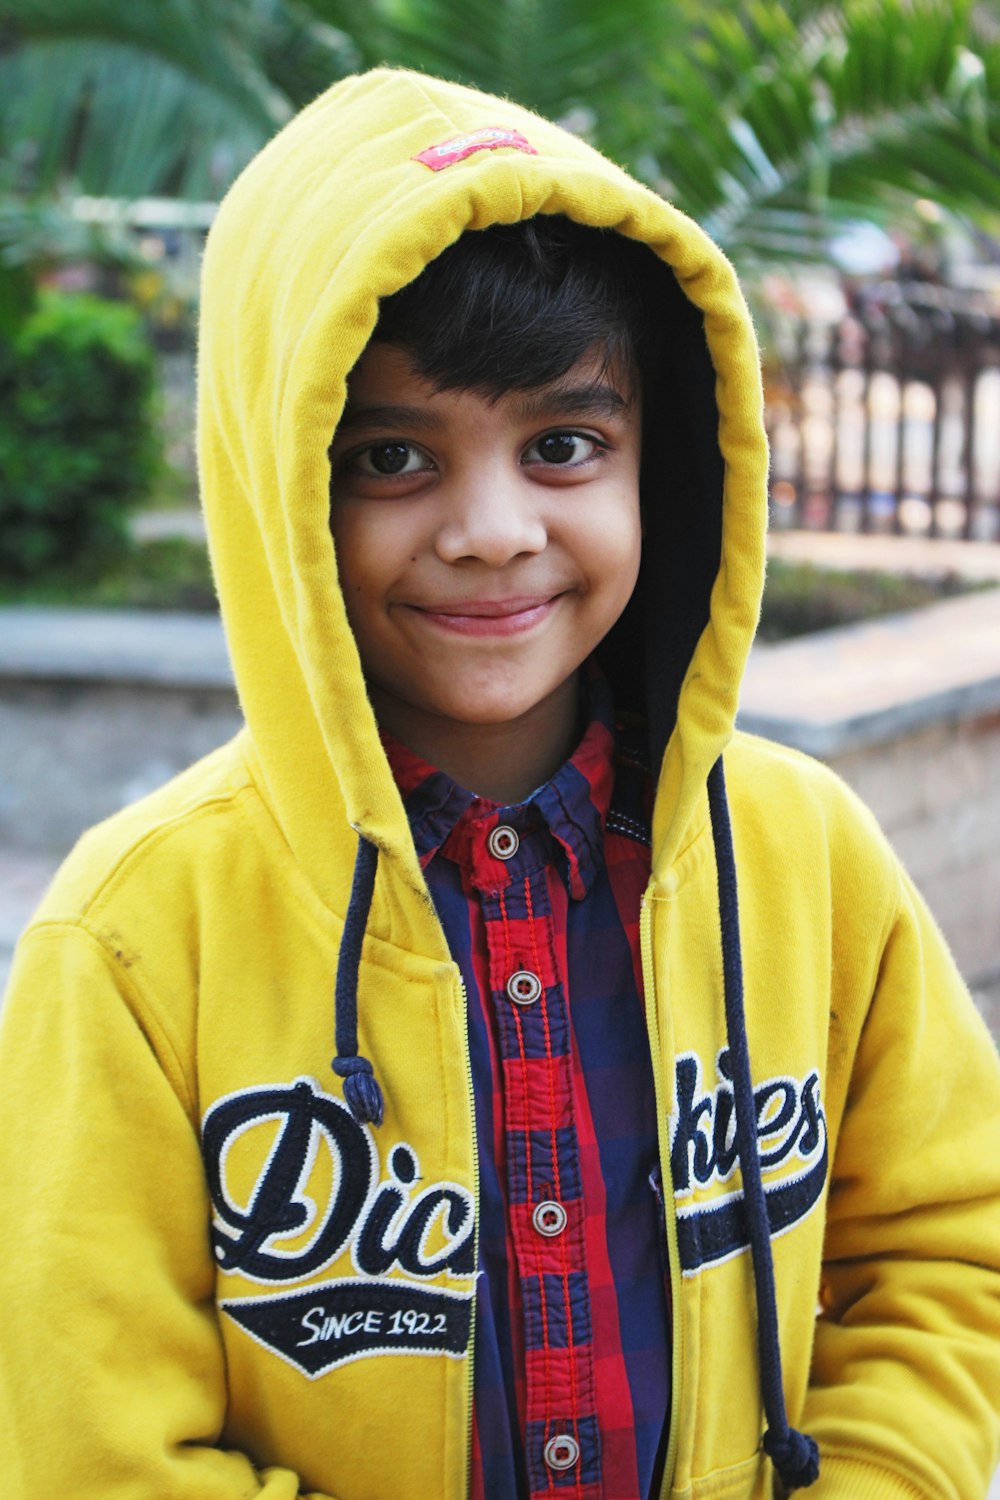 a young boy wearing a yellow sweatshirt and smiling